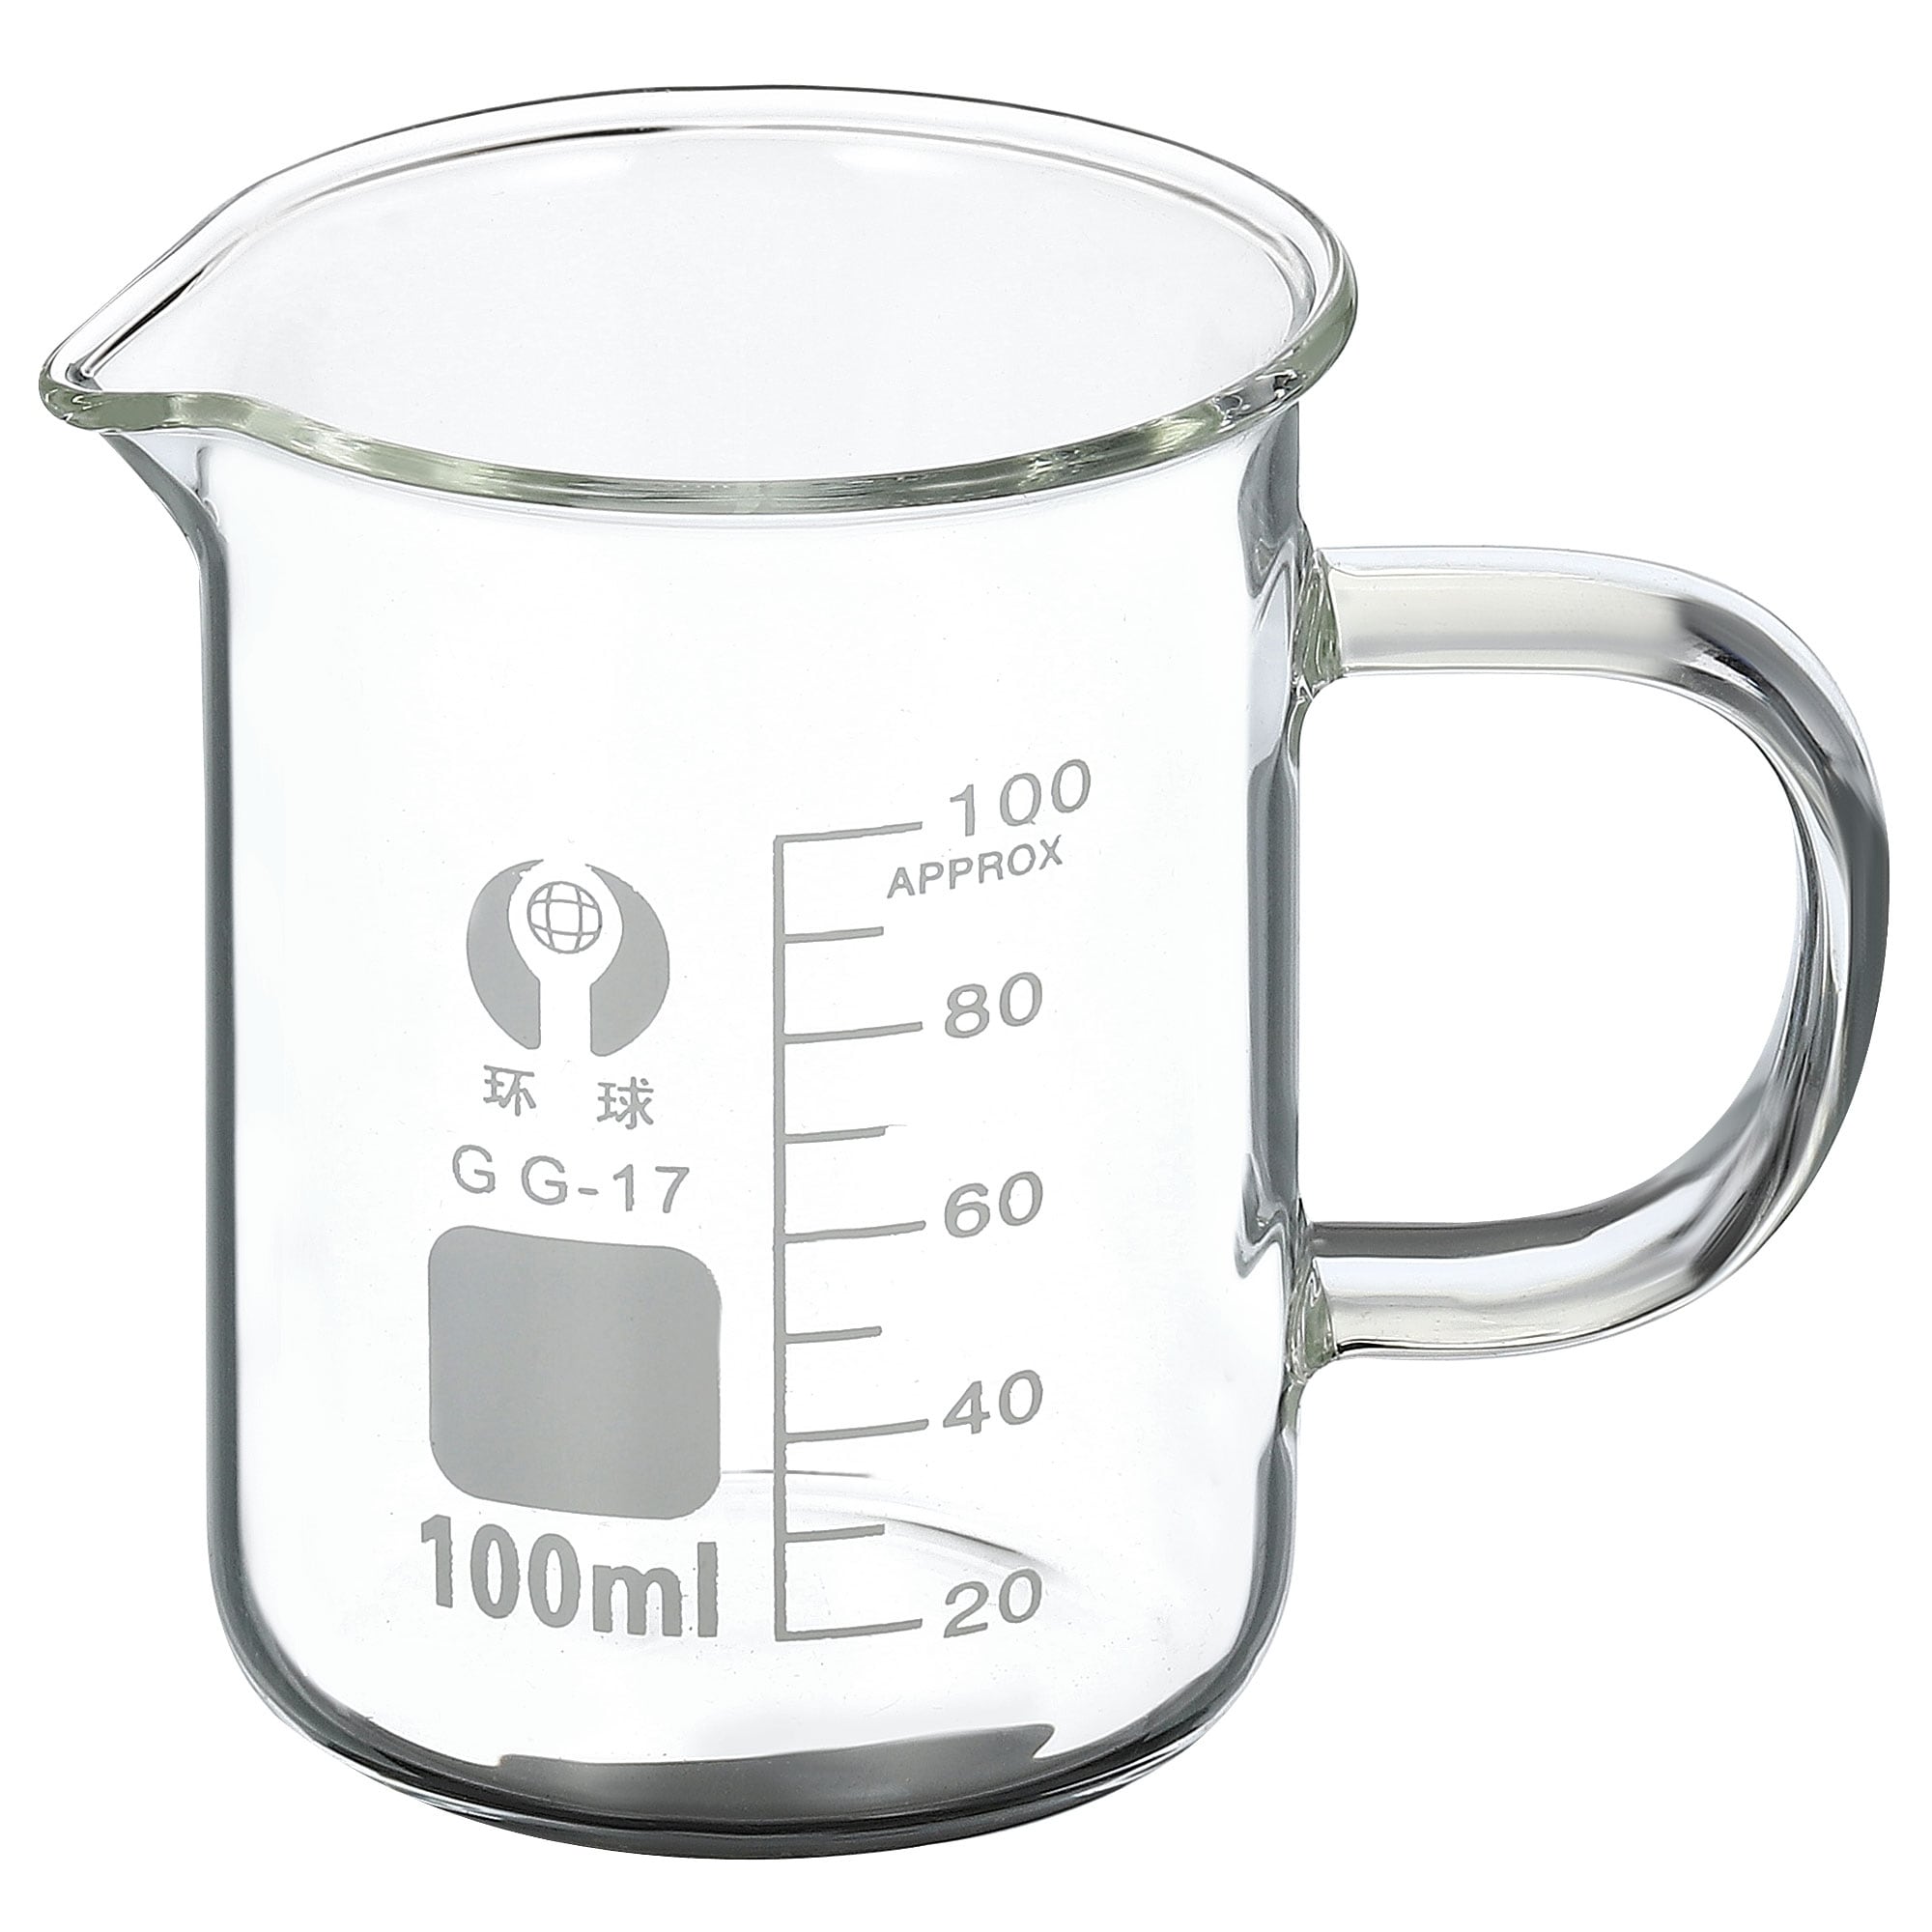 https://ak1.ostkcdn.com/images/products/is/images/direct/876bbce27e2ae675343f3d077fc0290ee83f16f6/100ml-Glass-Beaker-with-Handle%2C-3.3-Borosilicate-Graduated-Lab-Measuring-Cups.jpg